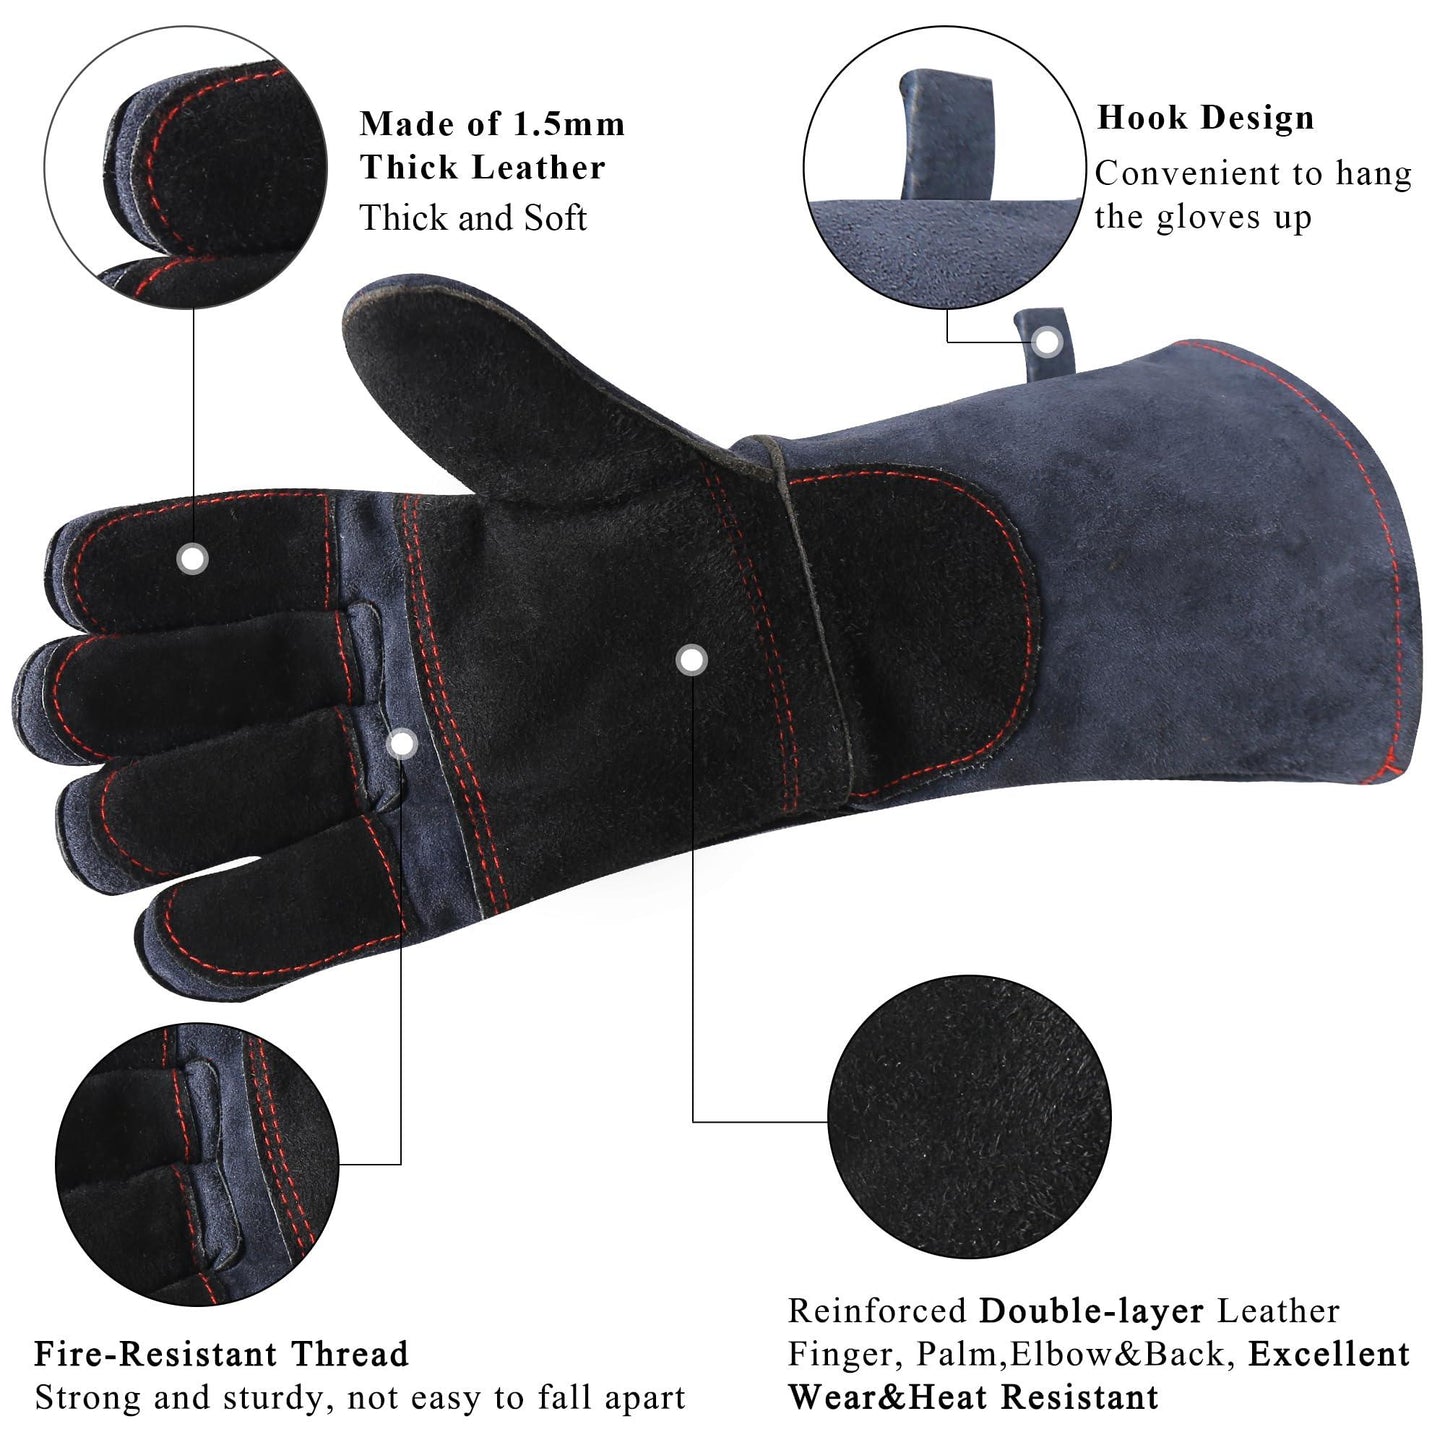 RAPICCA Fireplace Gloves Fire Heat Resistant: Dark-Grey 16IN 932℉ - Fireproof Leather for Fireplace Fire pit Wood stove Campfire Furnace BBQ Grill Stick Mig Welding Welder Gear - one size - CookCave